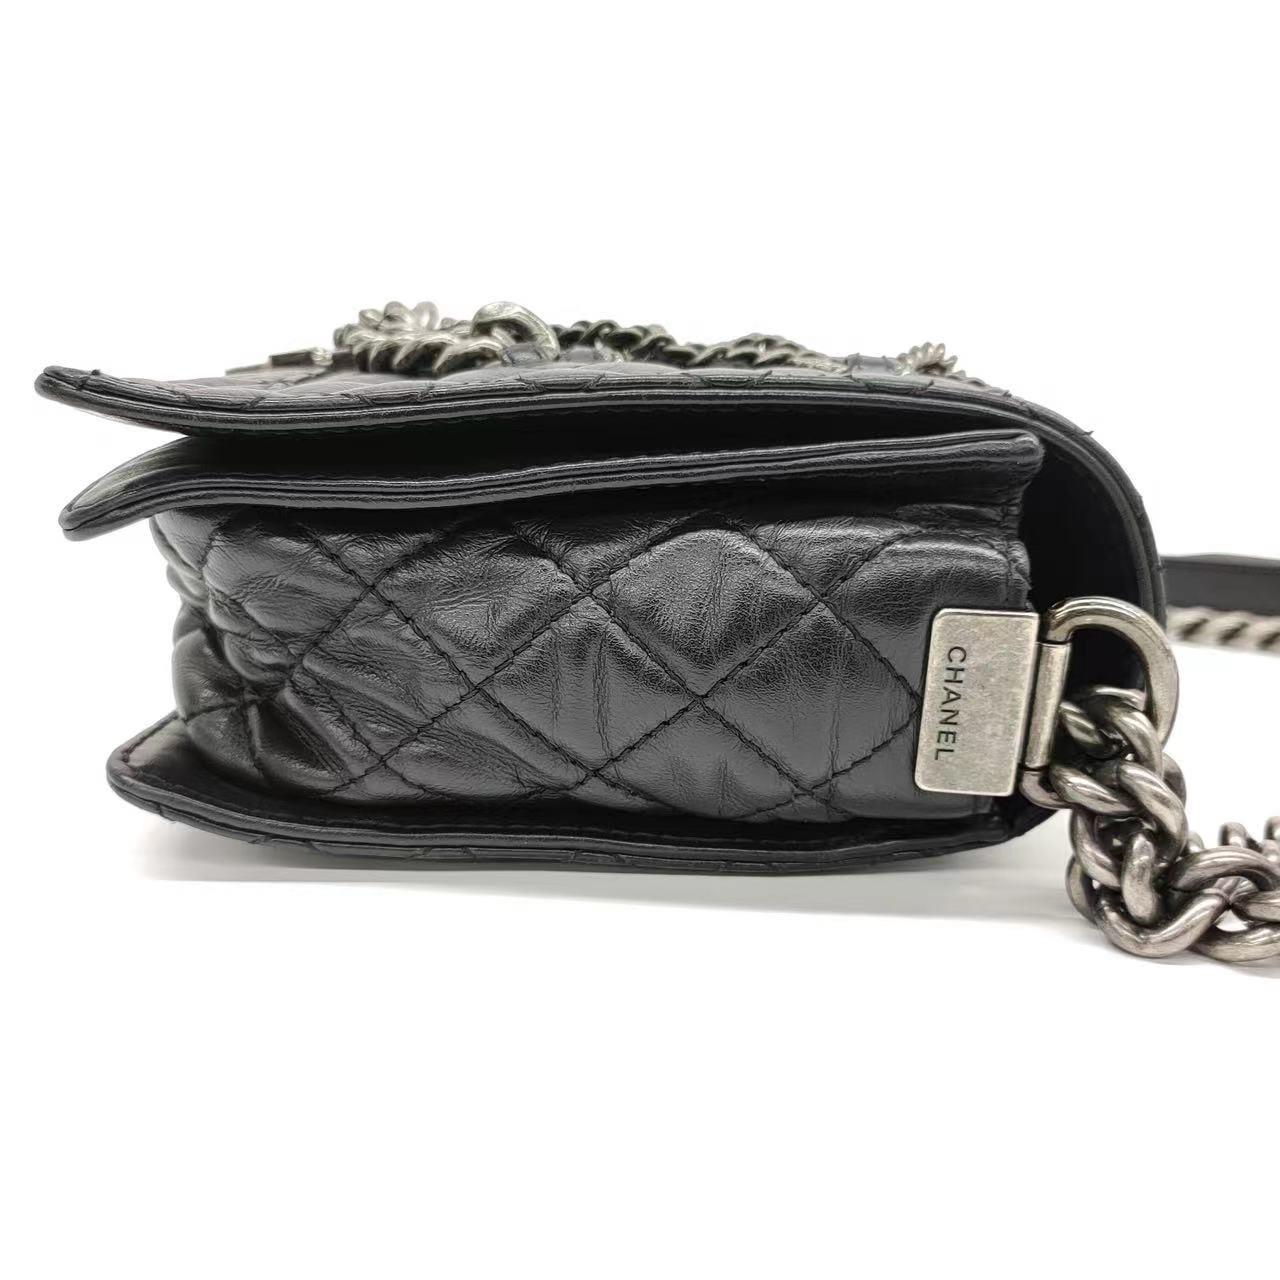 Constructed from black lambskin and adorned with silver gunmetal chains, this Chanel Enchained Boy Bag boasts both style and functionality. The iconic boy lock and famous Chanel Diamond quilting adorn the exterior, while the interior offers ample